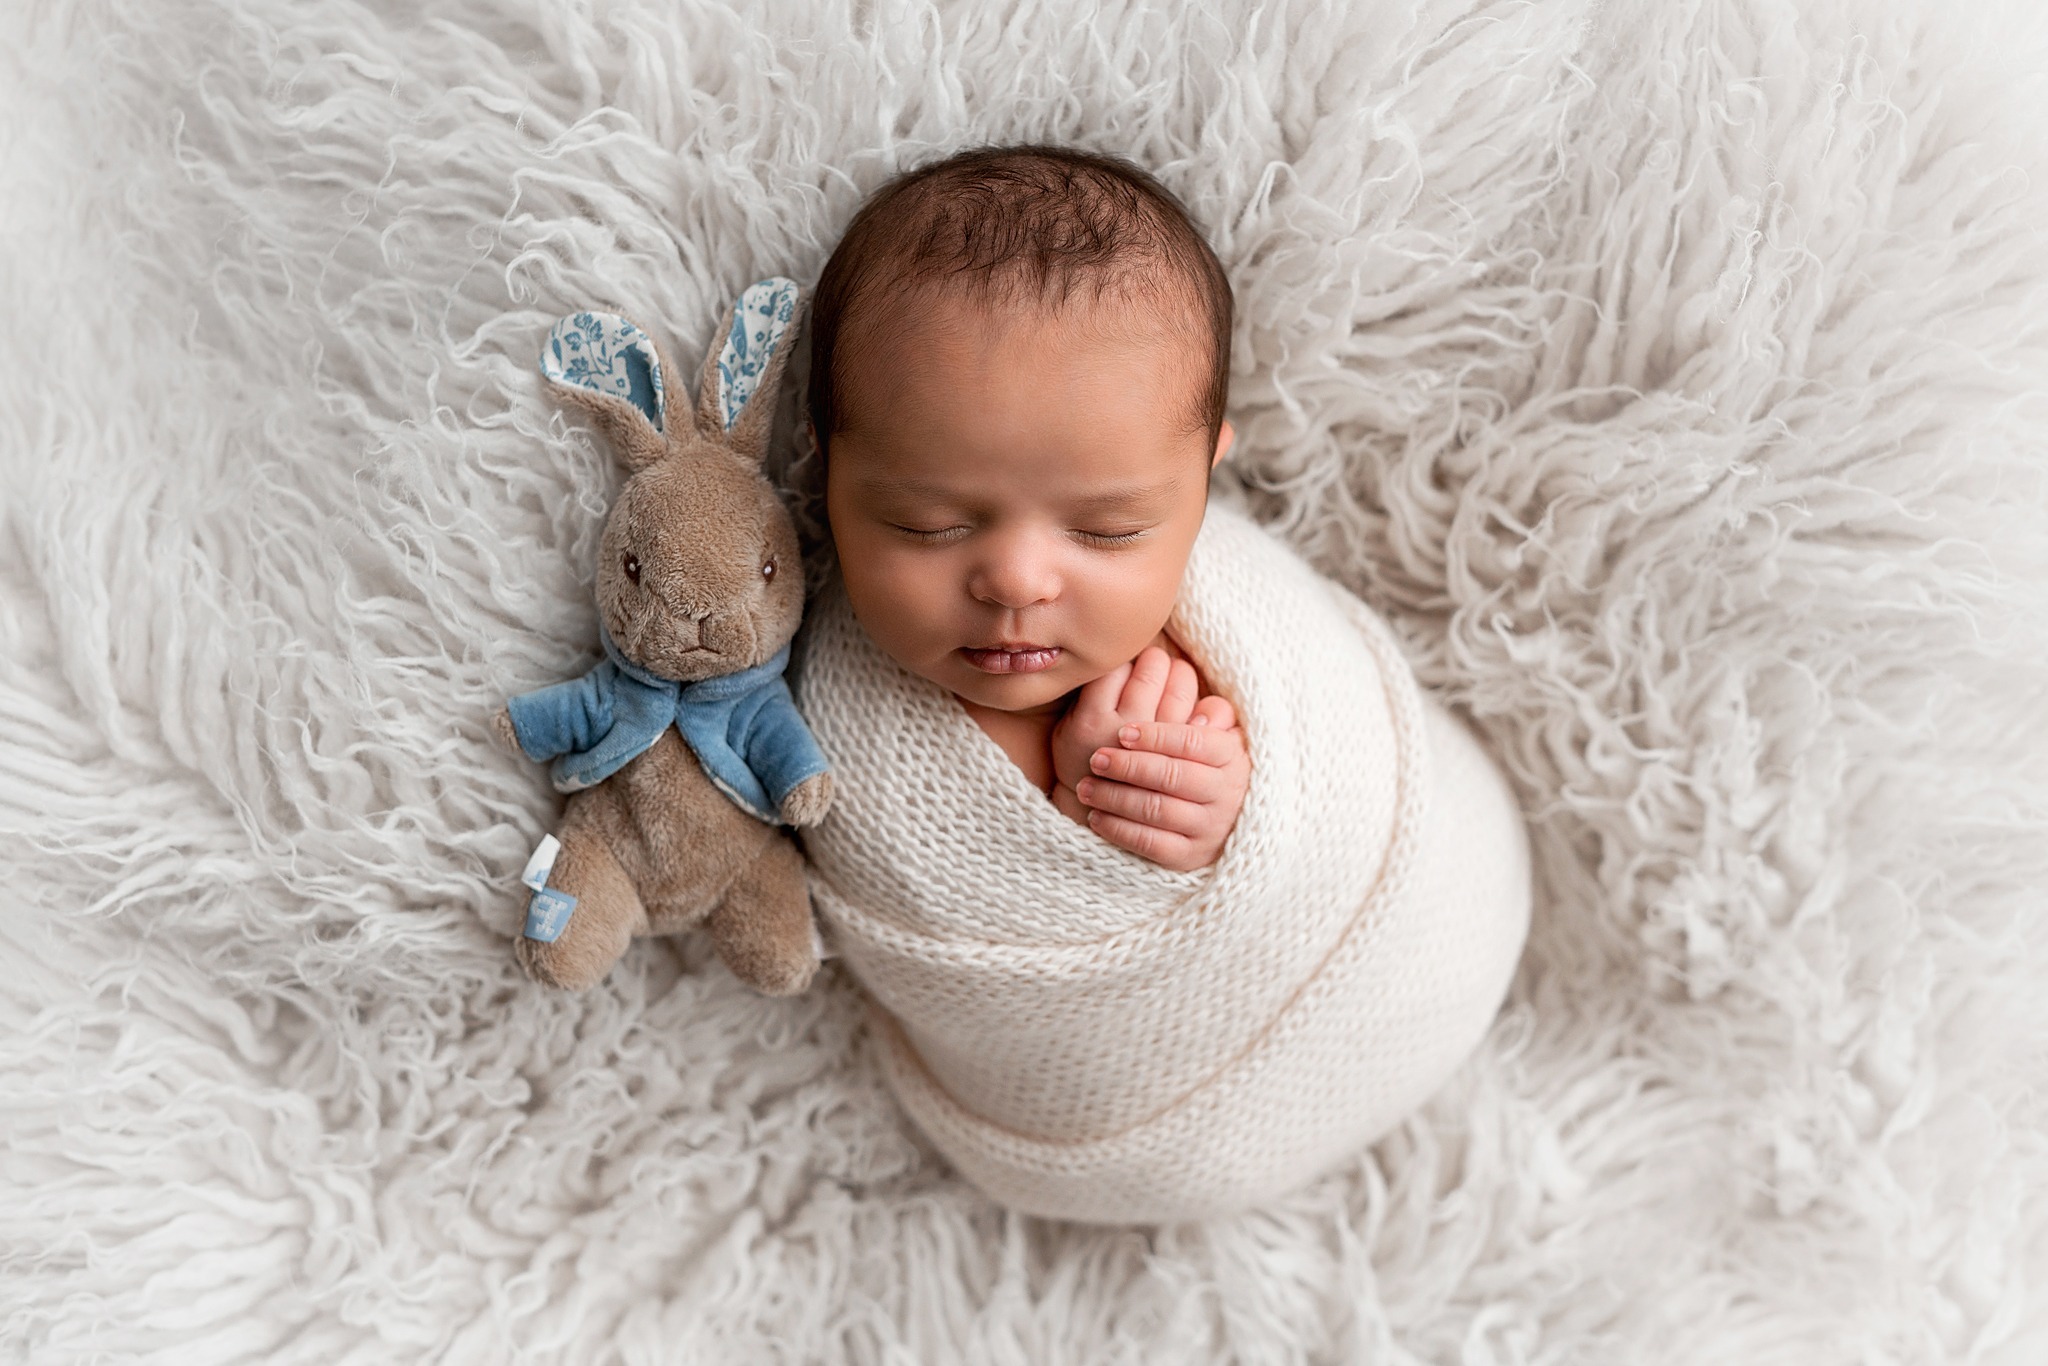 Newborn Photoshoot Wakefield. Sleeping newborn baby swaddled neatly in a cream knitted blanket. He's nestled snug into a fluffy fur rug and snuggled up to a mini Peter Rabbit cuddly toy.